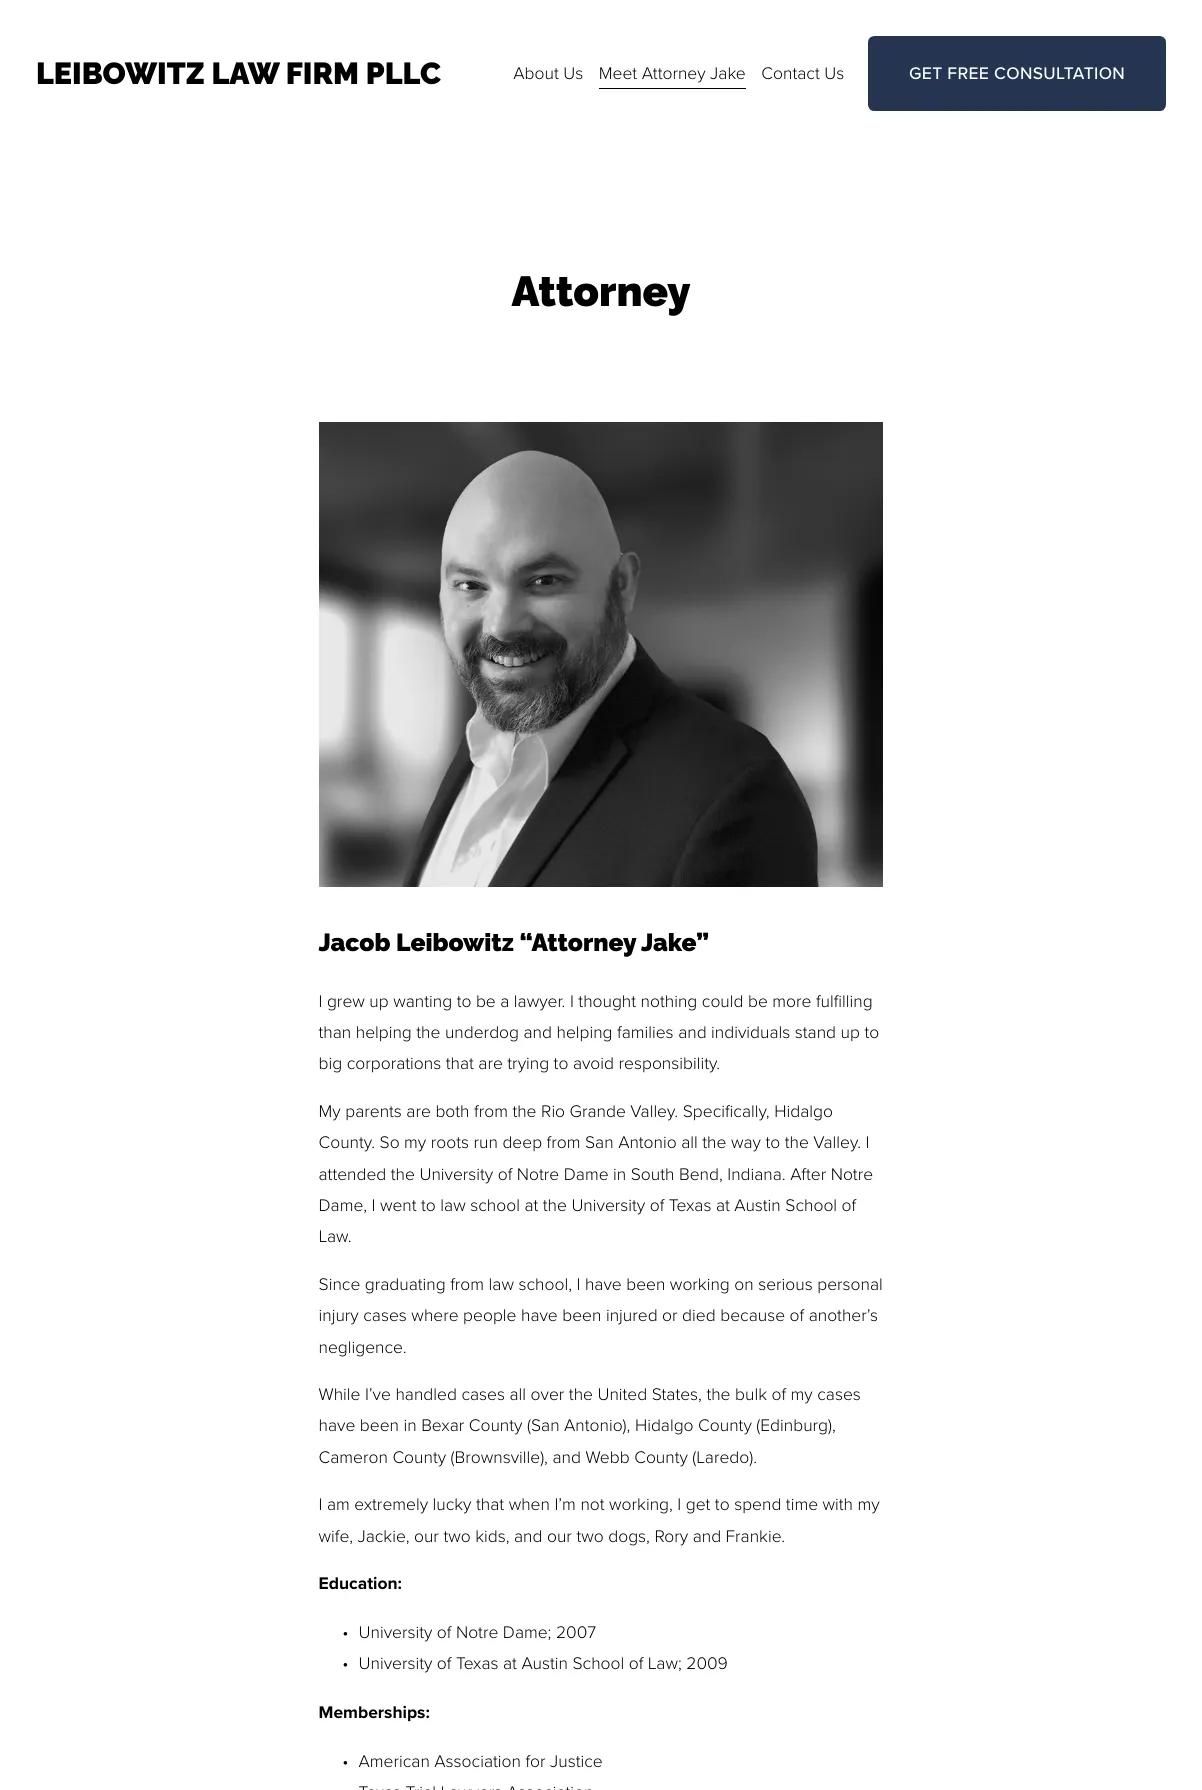 Screenshot 2 of Leibowitz Law Firm PLLC (Example Squarespace Law Firm Website)